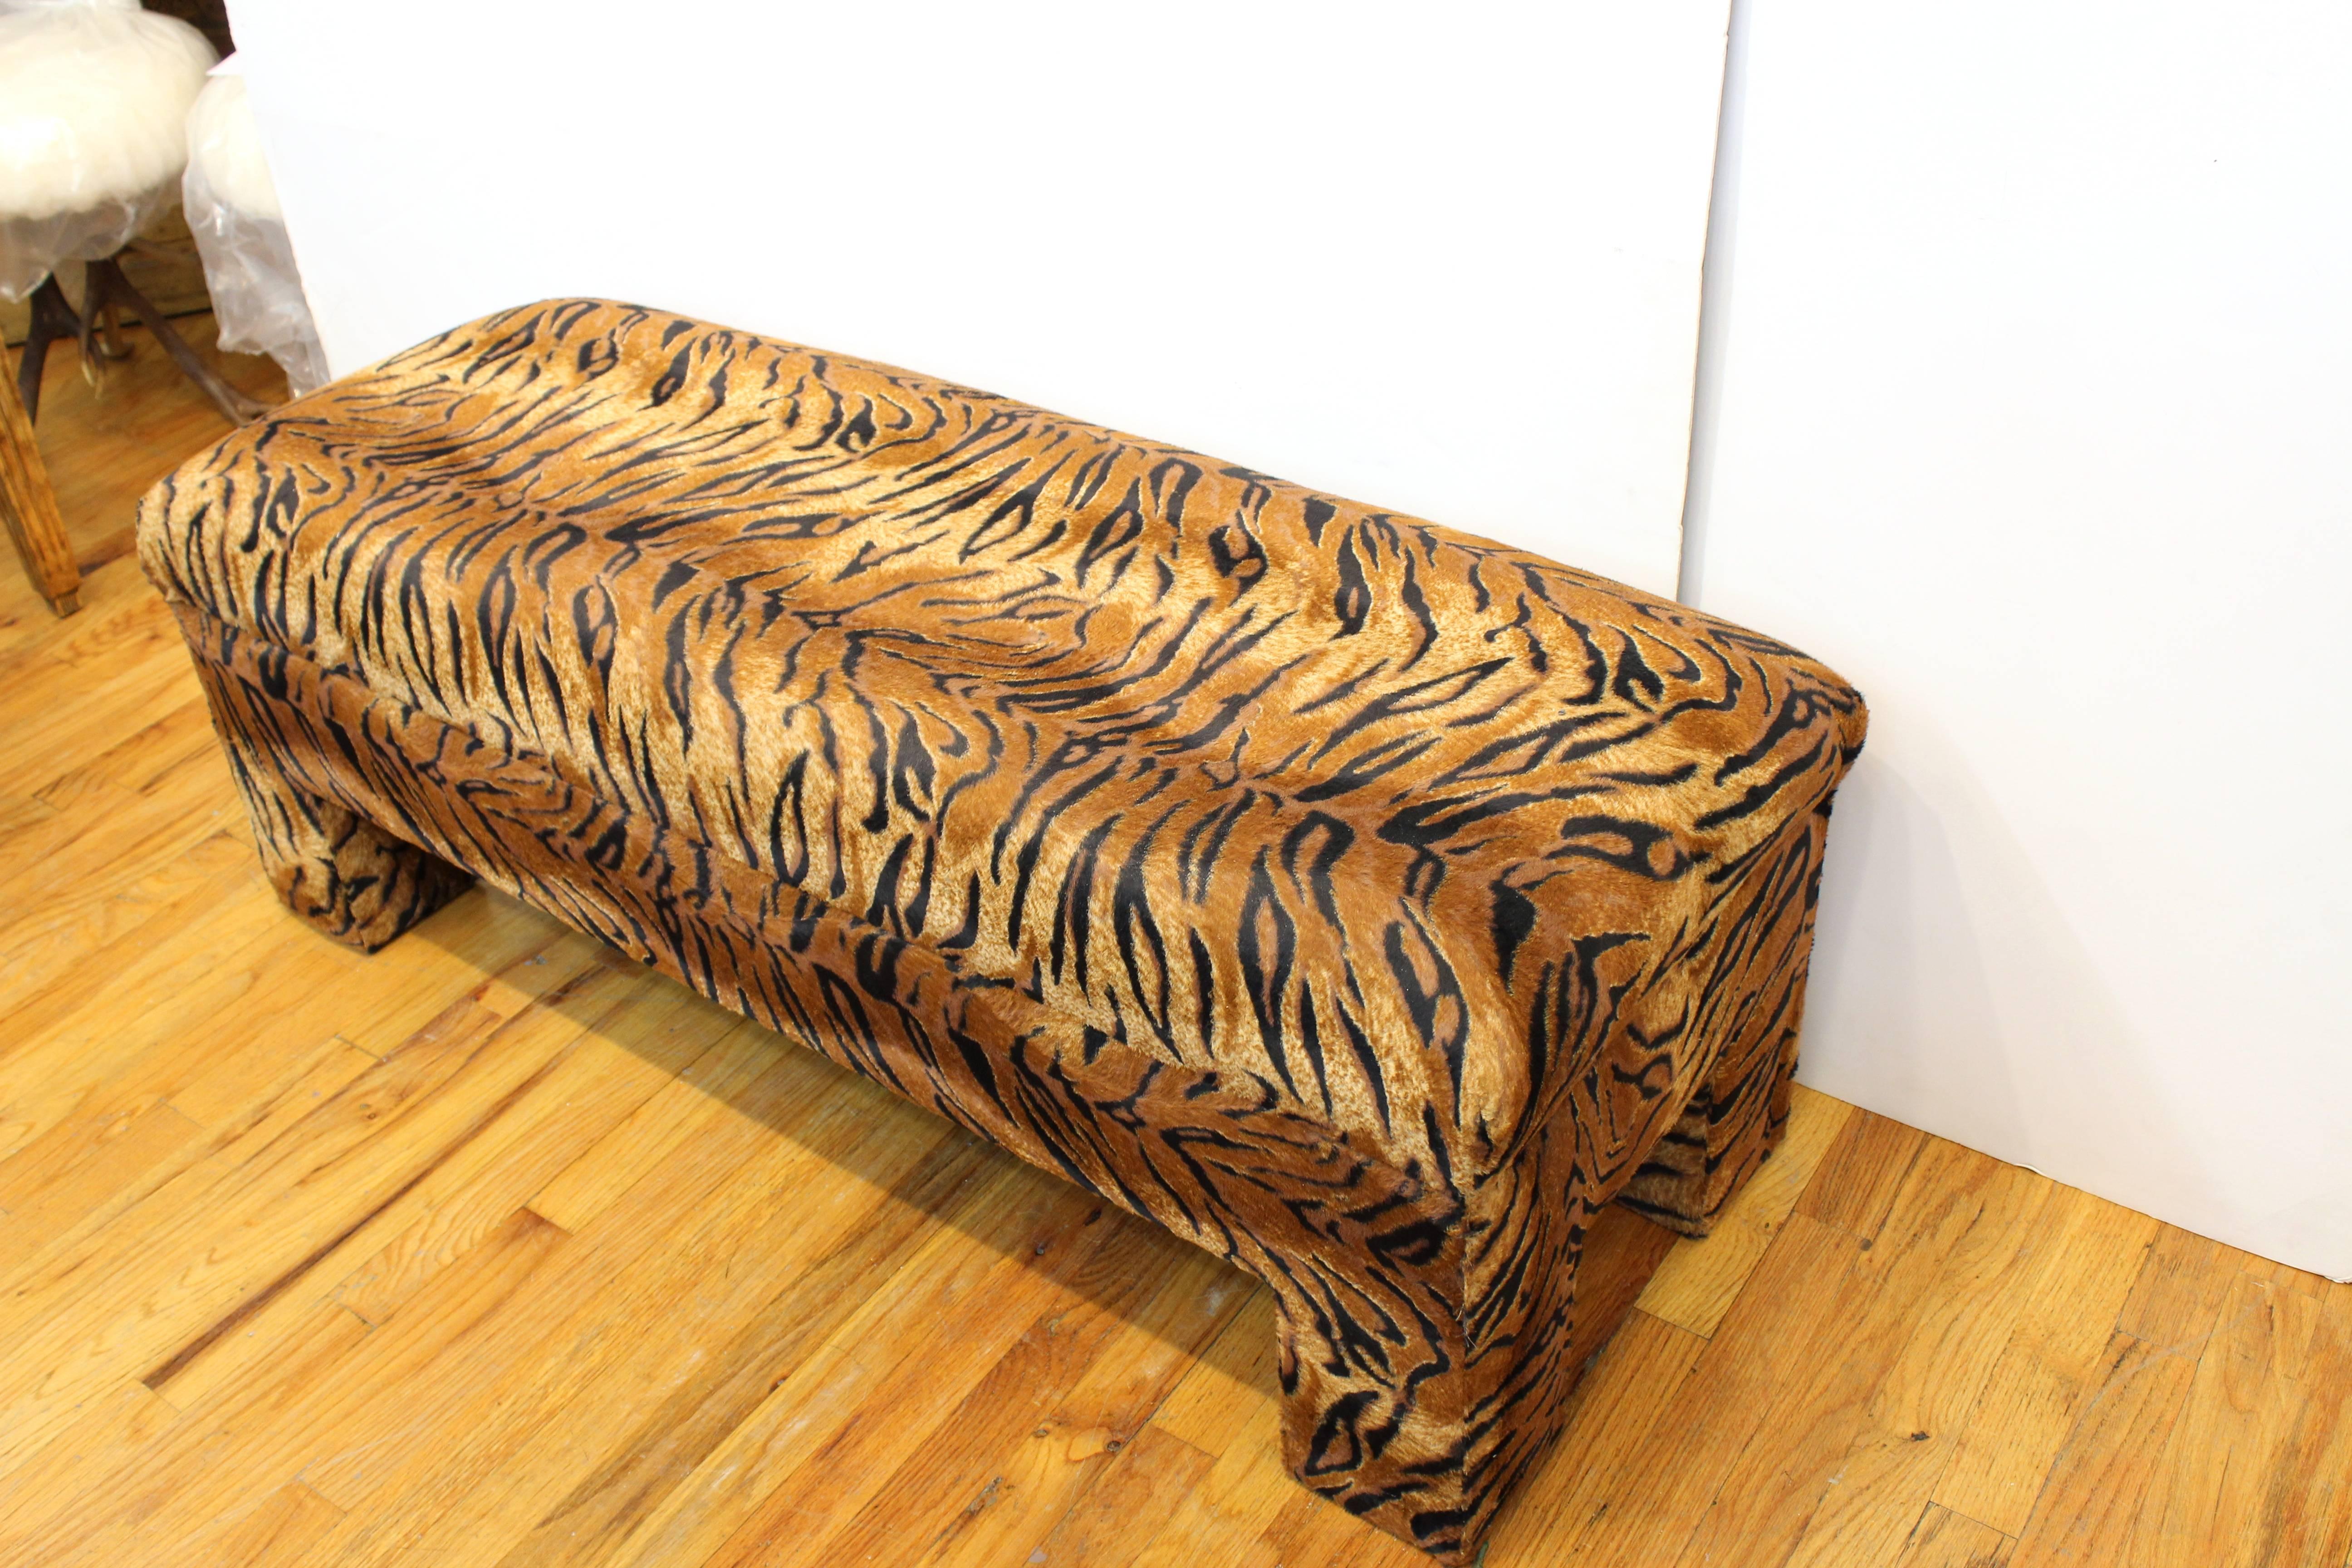 A rectangular shaped bench upholstered in tiger print textile, reminiscent of the opulence of the Hollywood Regency style. The bench can seat up to three people and has recently been re-upholstered. The piece is in good vintage condition with wear